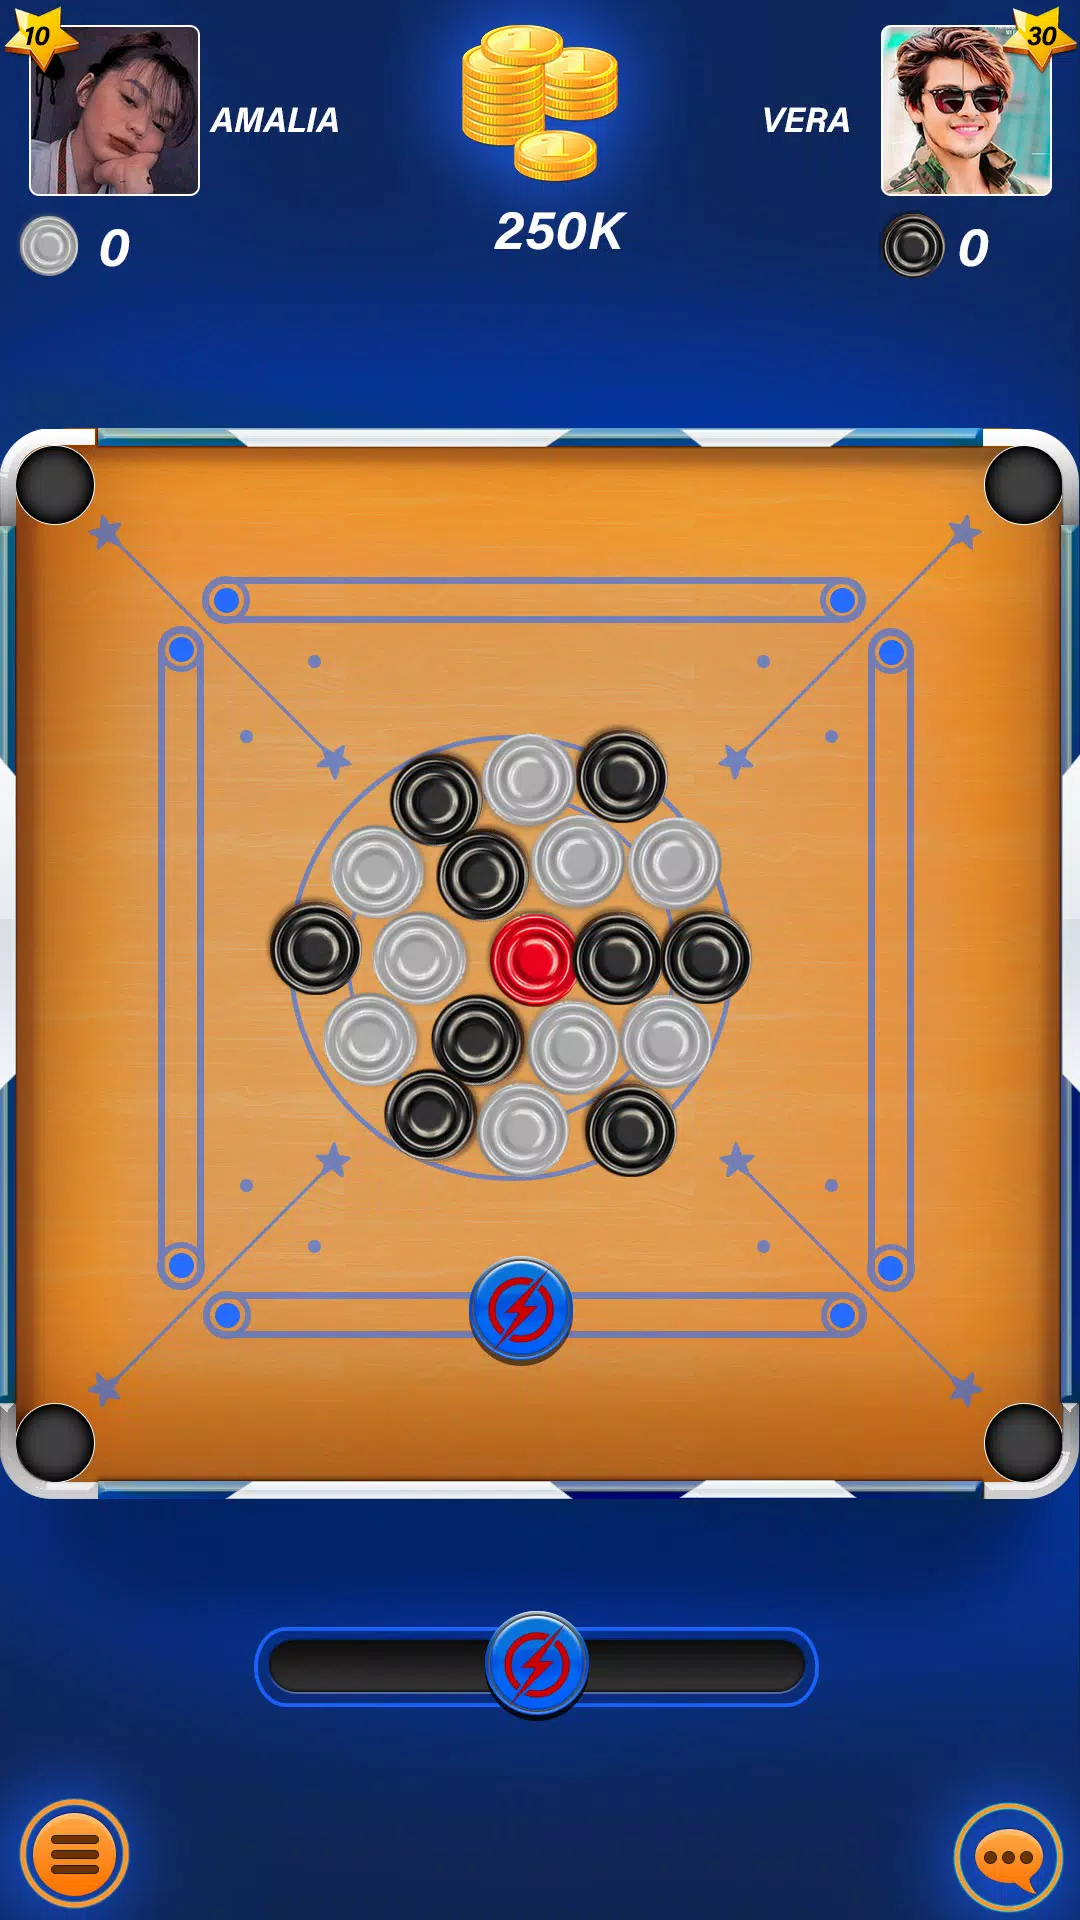 Carrom Pool Latest Android APK Download- Juxia